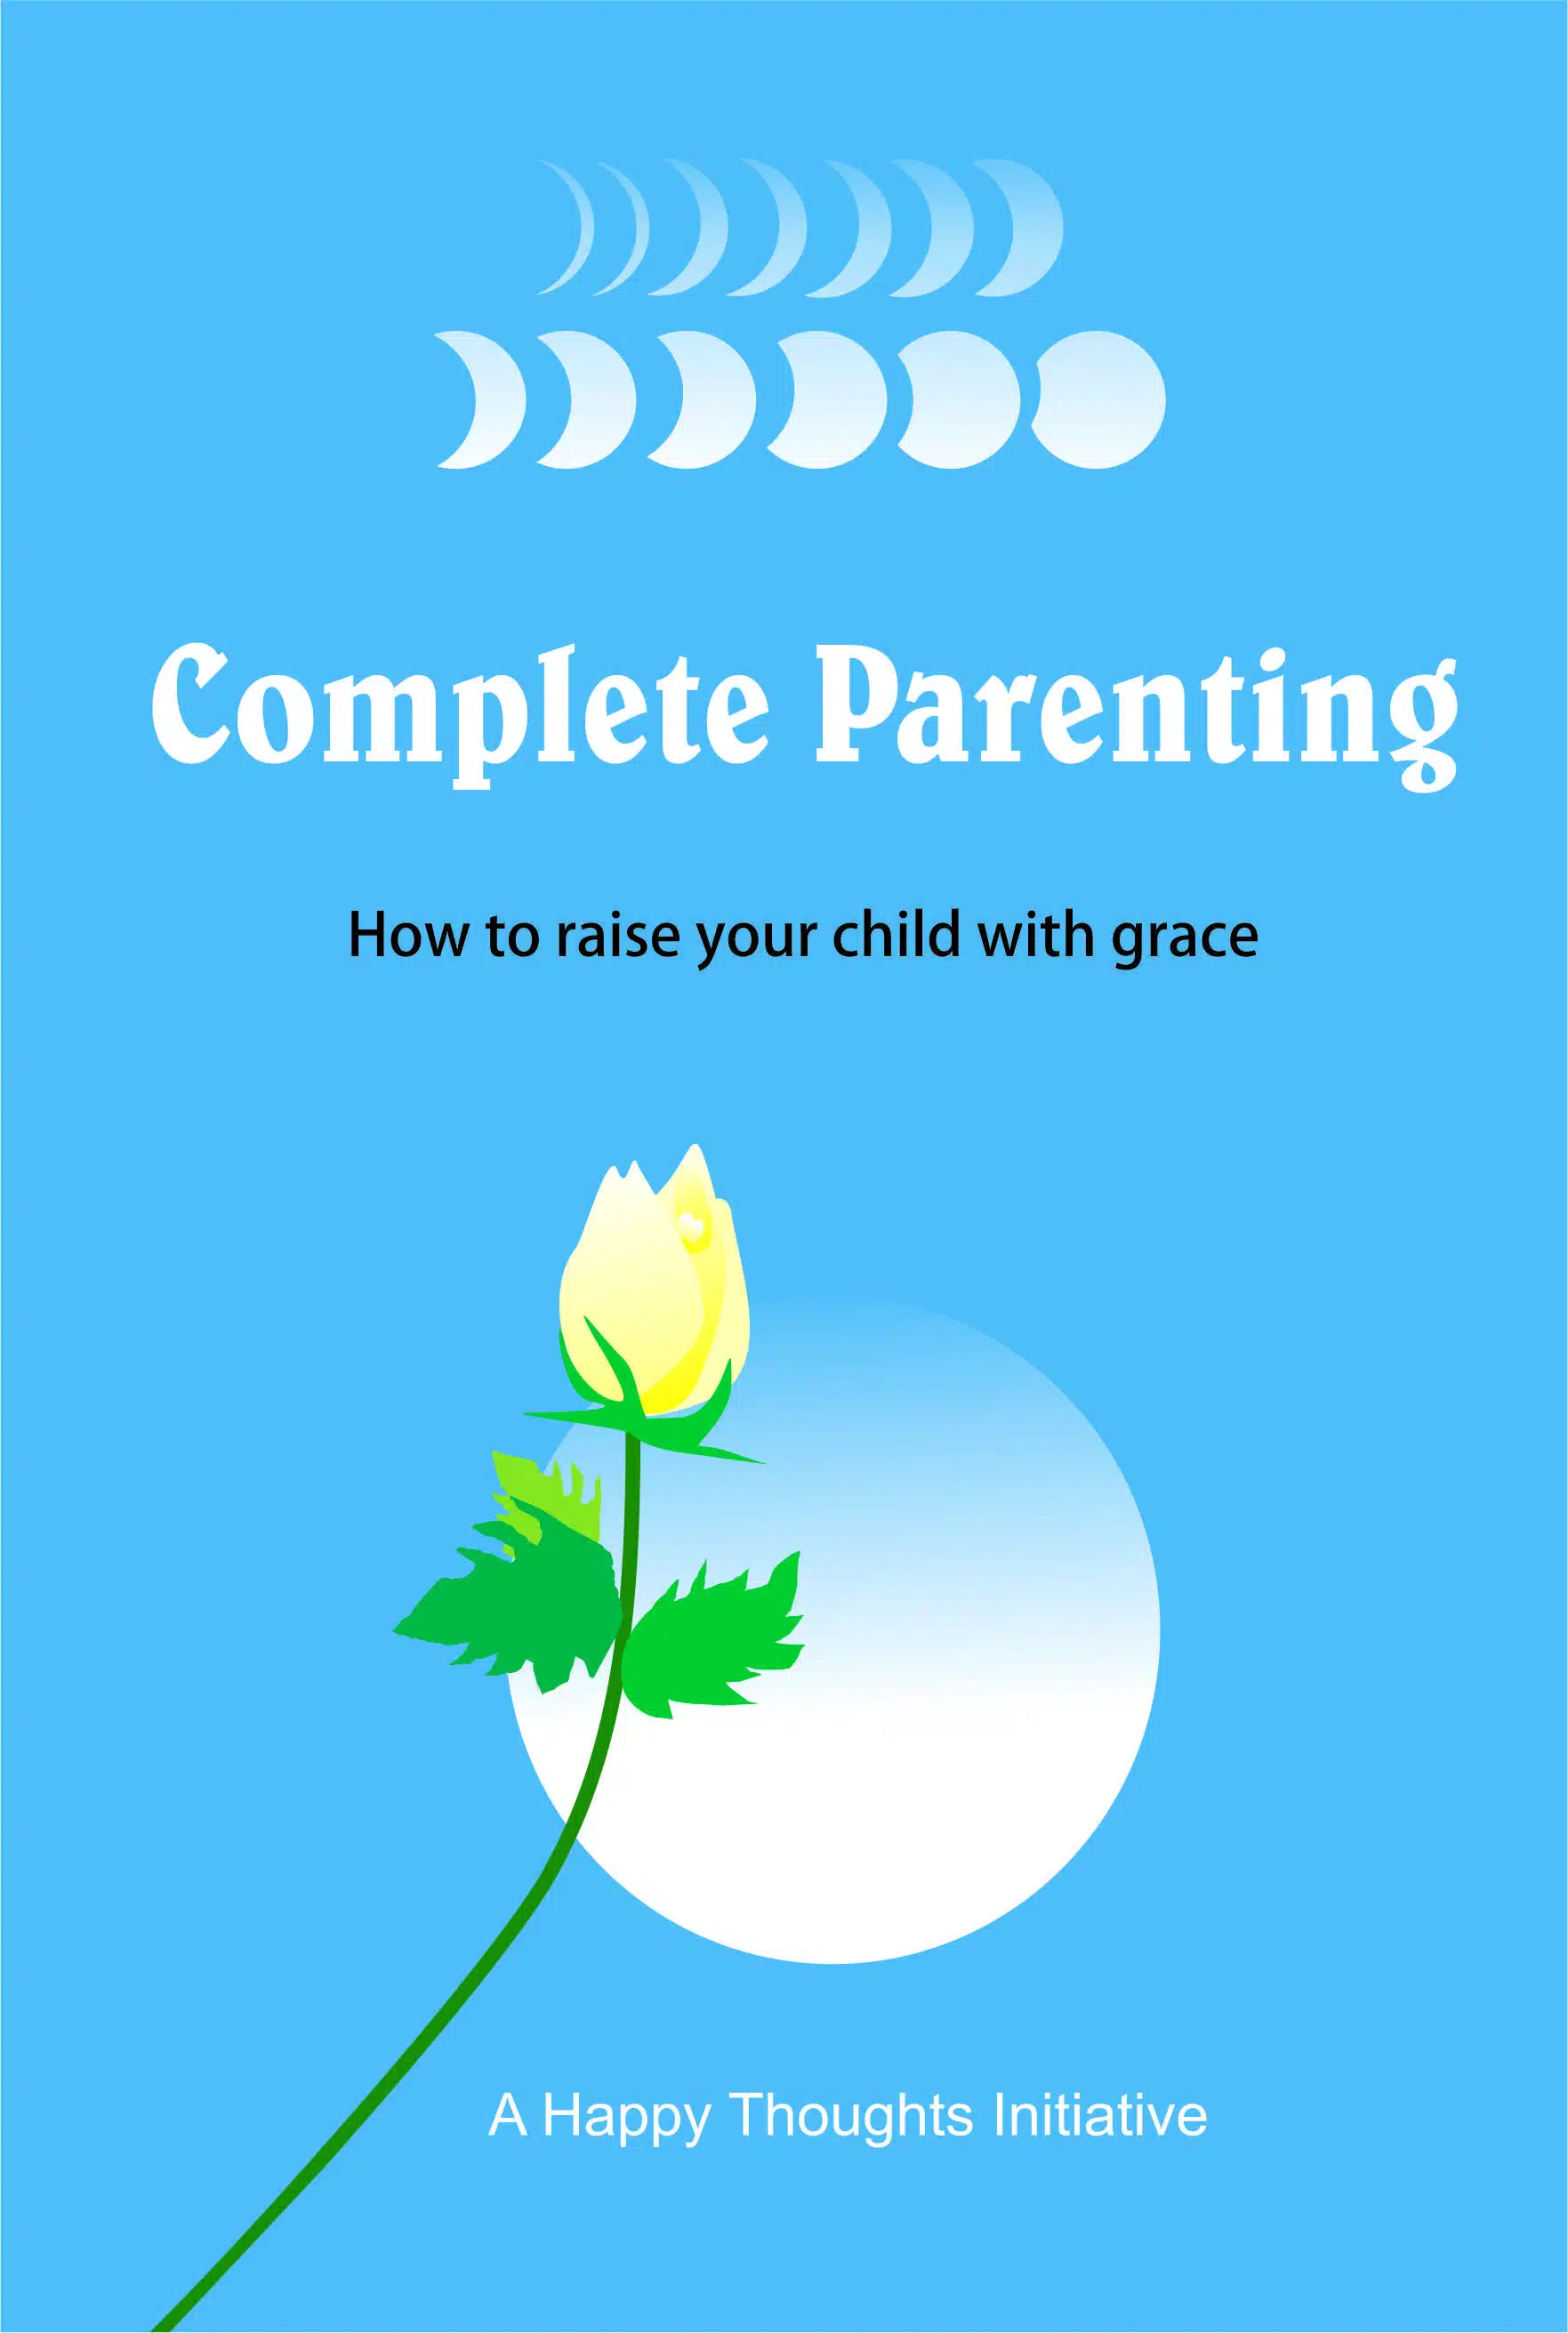 Complete Parenting - How to raise your child with grace